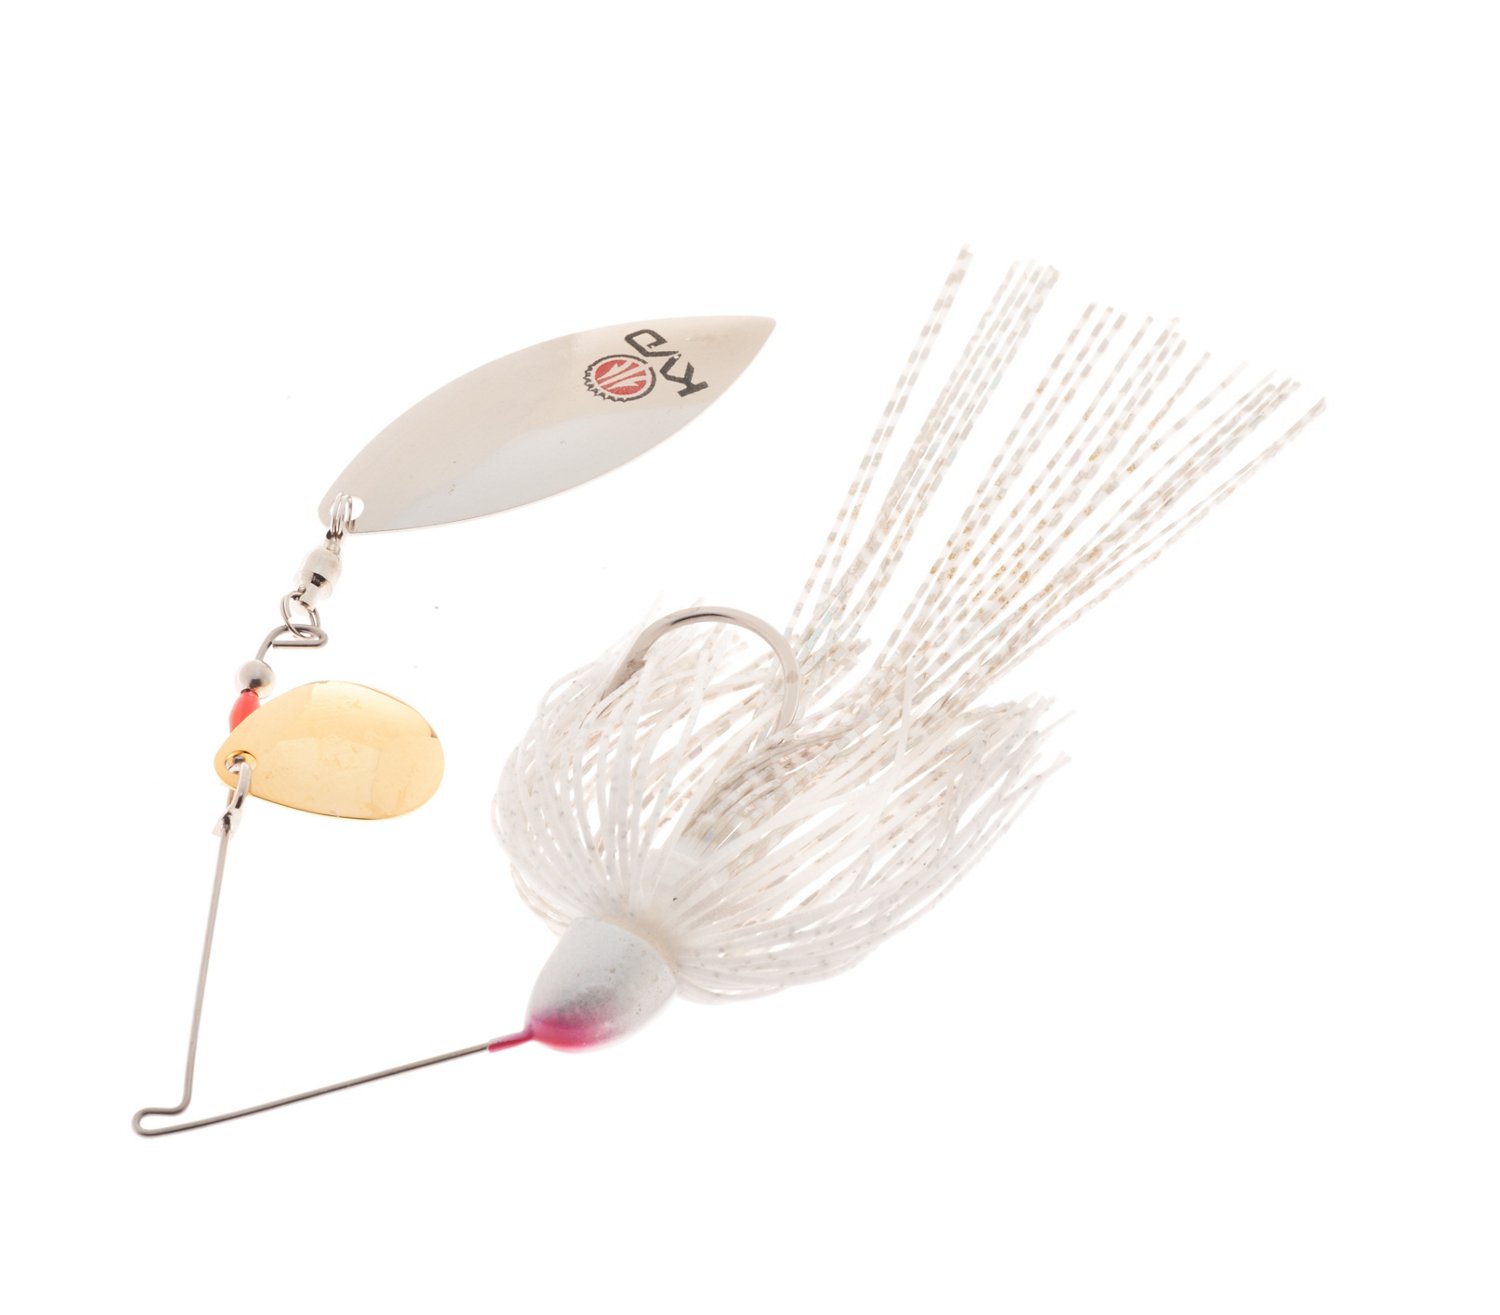 Strike King Finesse KVD 3/8 oz Spinnerbait Lure Sexy Shad